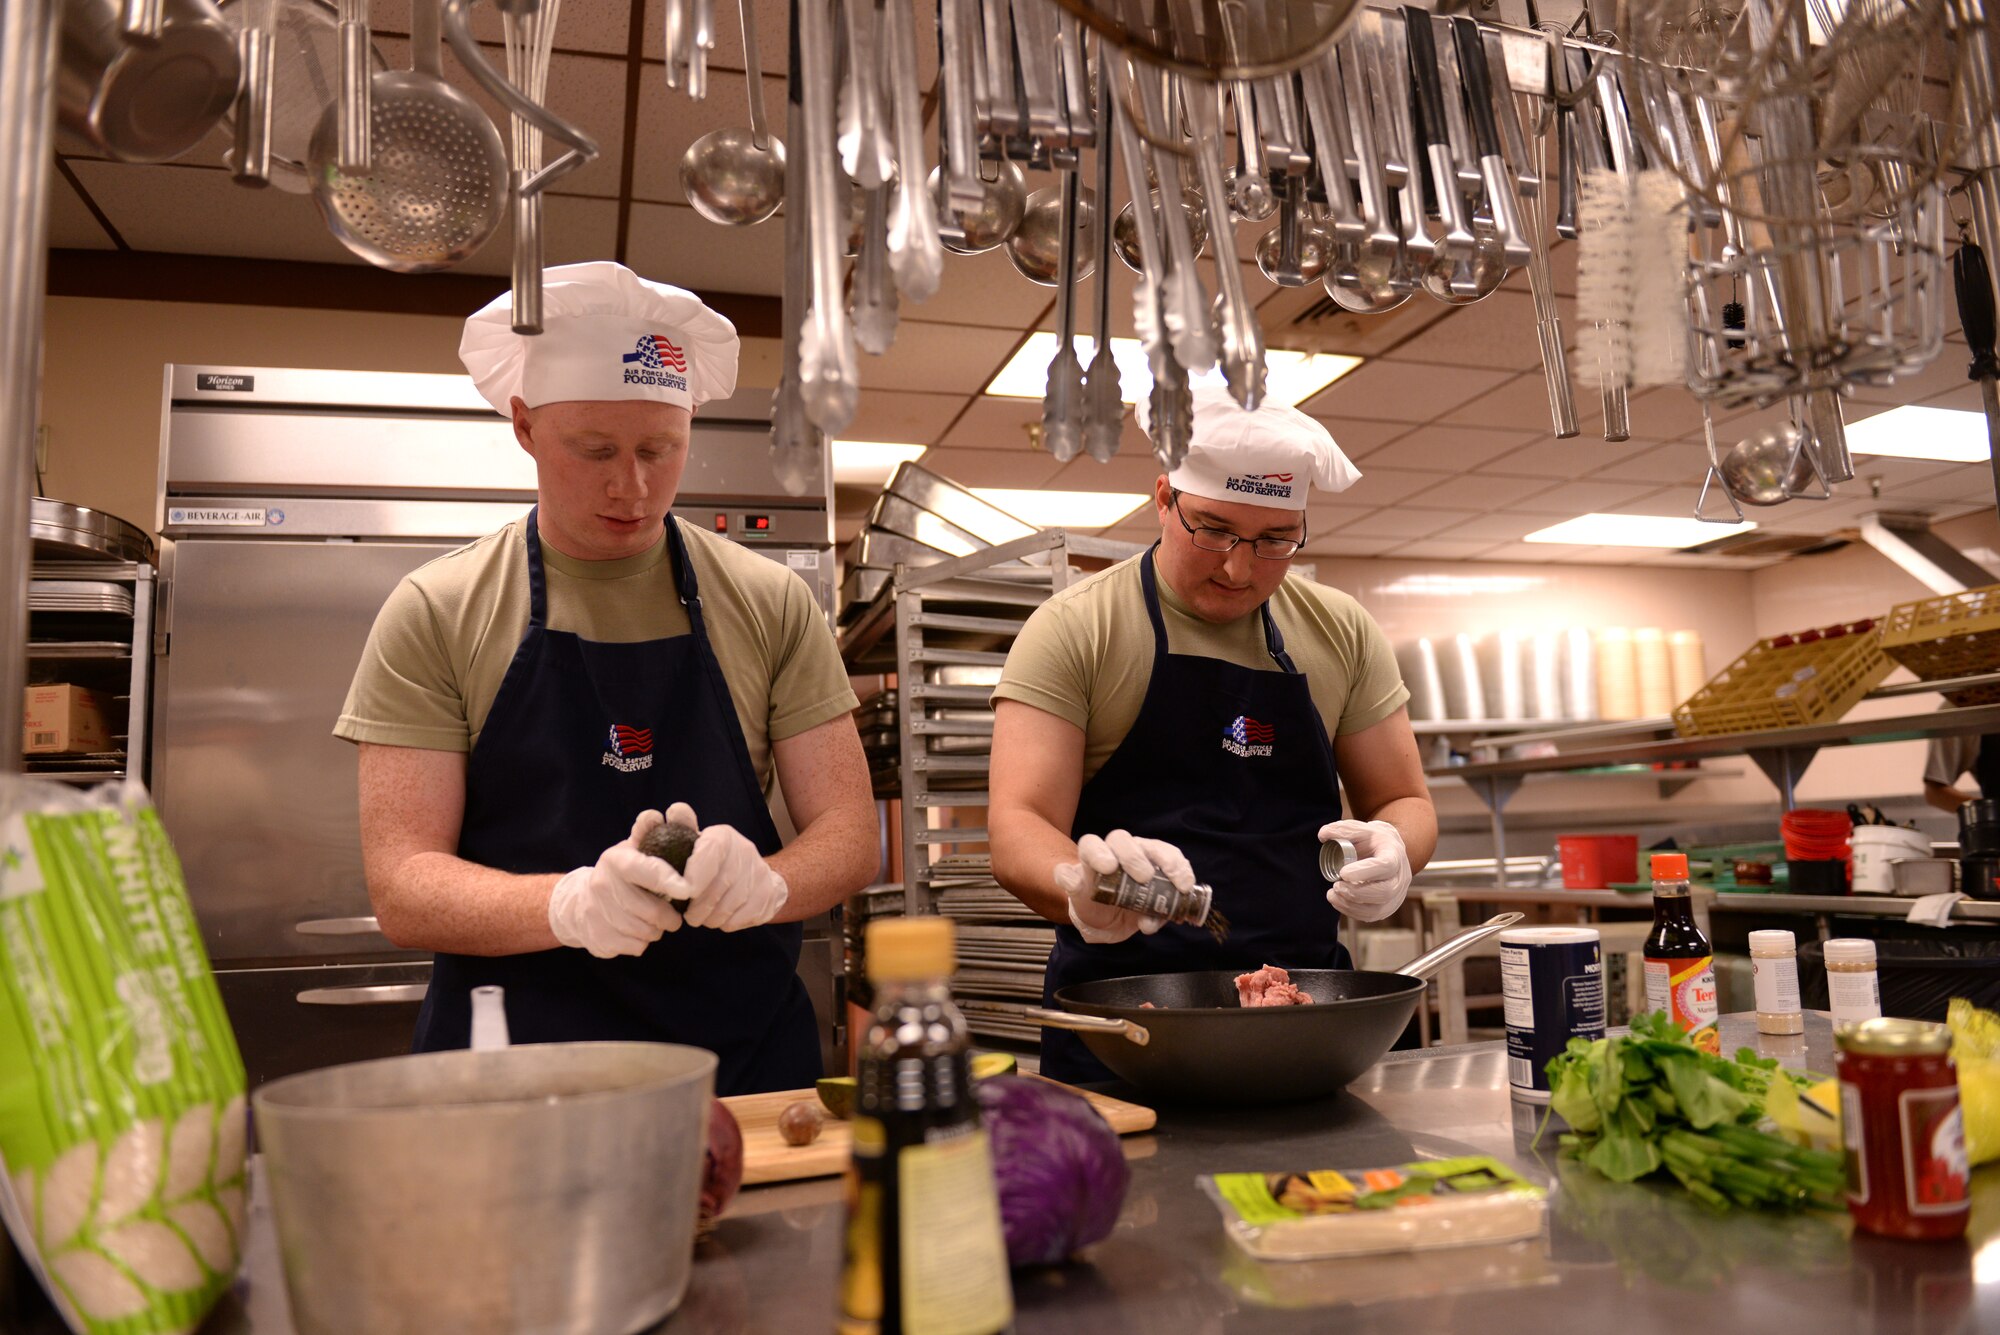 Airman 1st Class Joel Hendrickson, 56th Logistics Readiness Squadron vehicle operator, and Senior Airman David Escobar, 56th Force Support Squadron food service apprentice, prepare Asian-style food for judging during the Taste of Luke cooking competition at Luke Air Force Base, Ariz., May 9, 2018. Three teams of Luke Airmen competed against each other in a competition to cook Asian-inspired food in honor of Asian-Pacific Islander Heritage Month, which takes place throughout May. (U.S. Air Force photo by Senior Airman Ridge Shan)